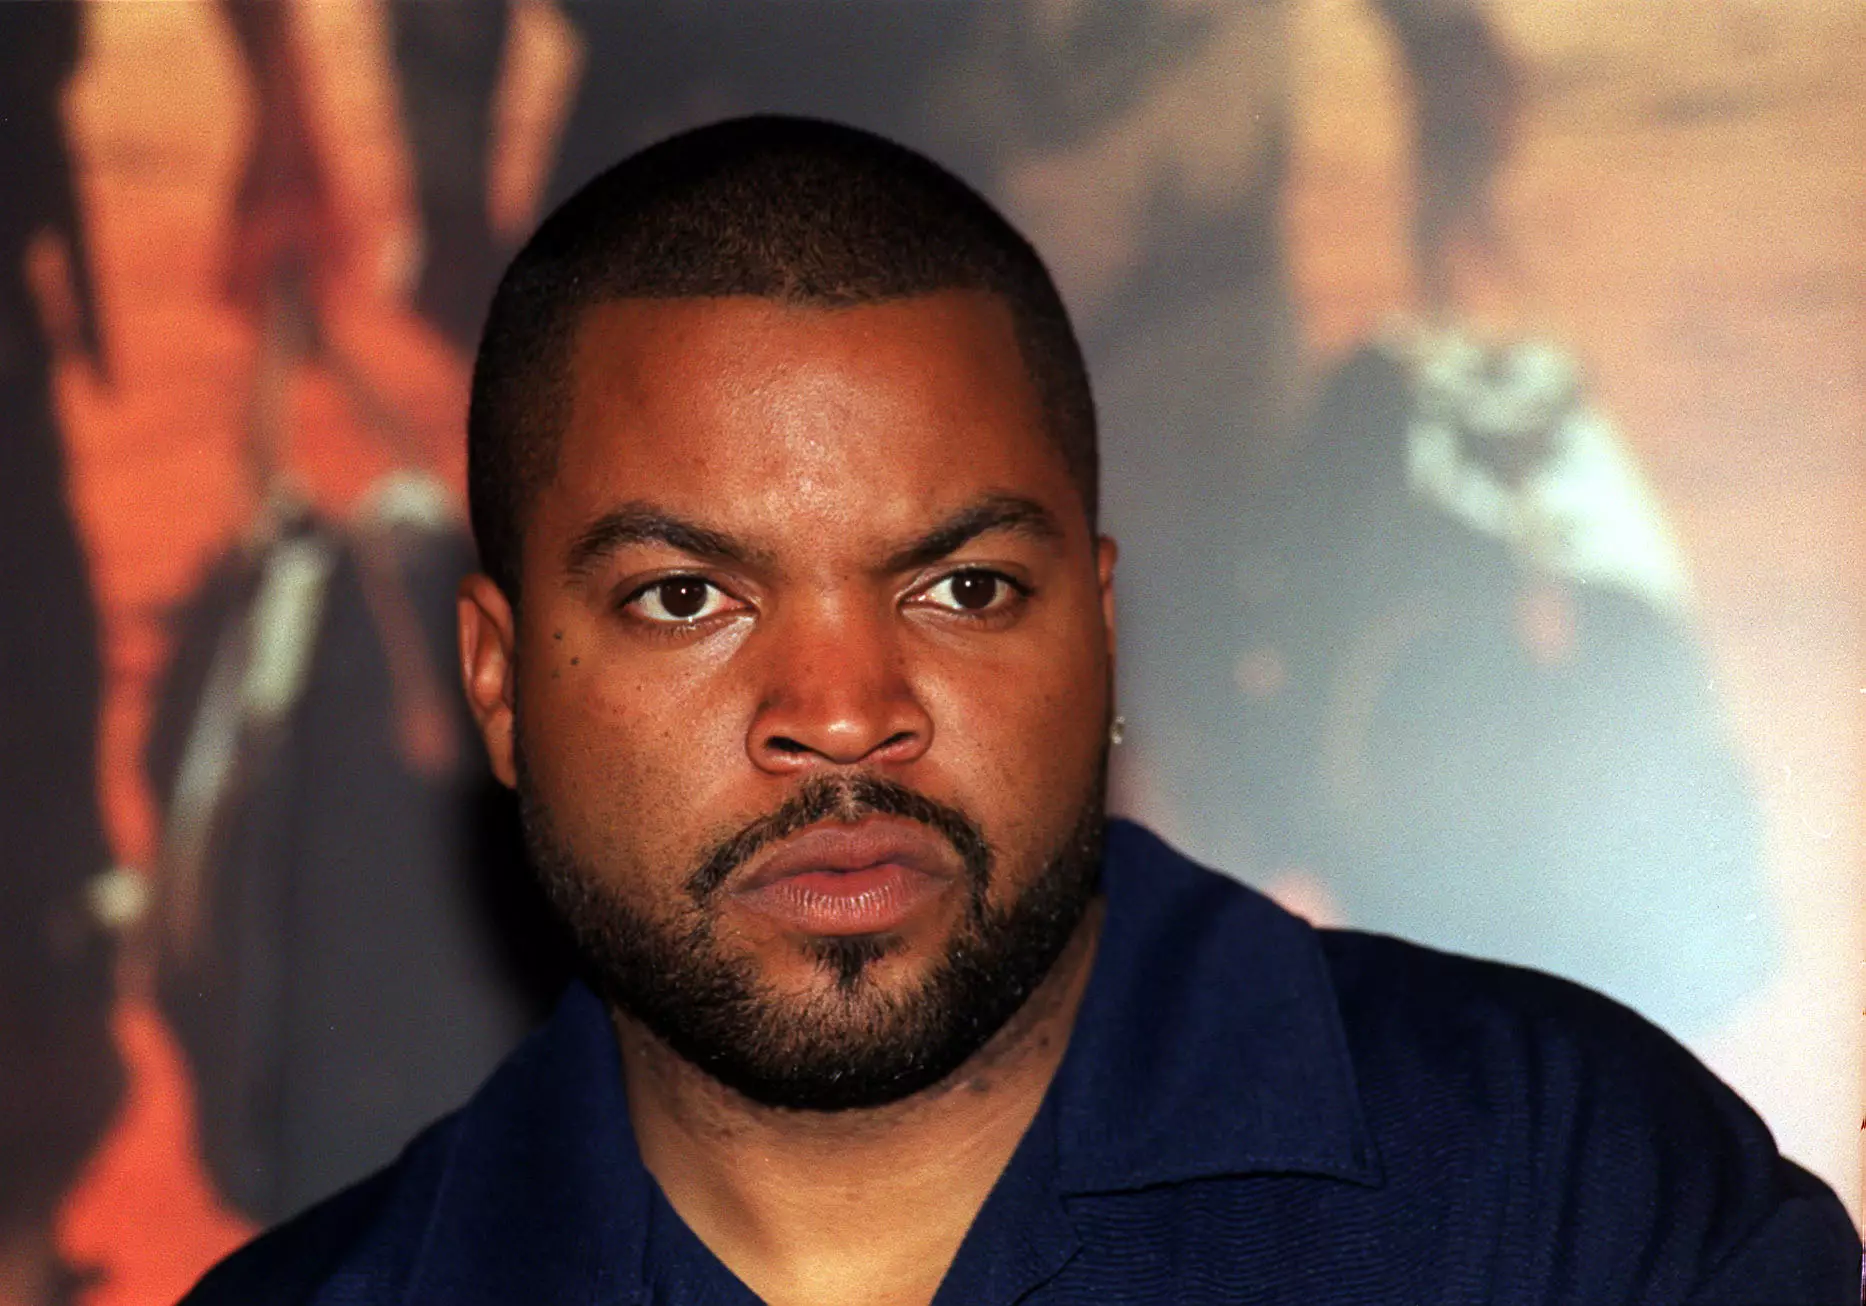 Ice Cube, perhaps having a passable day.